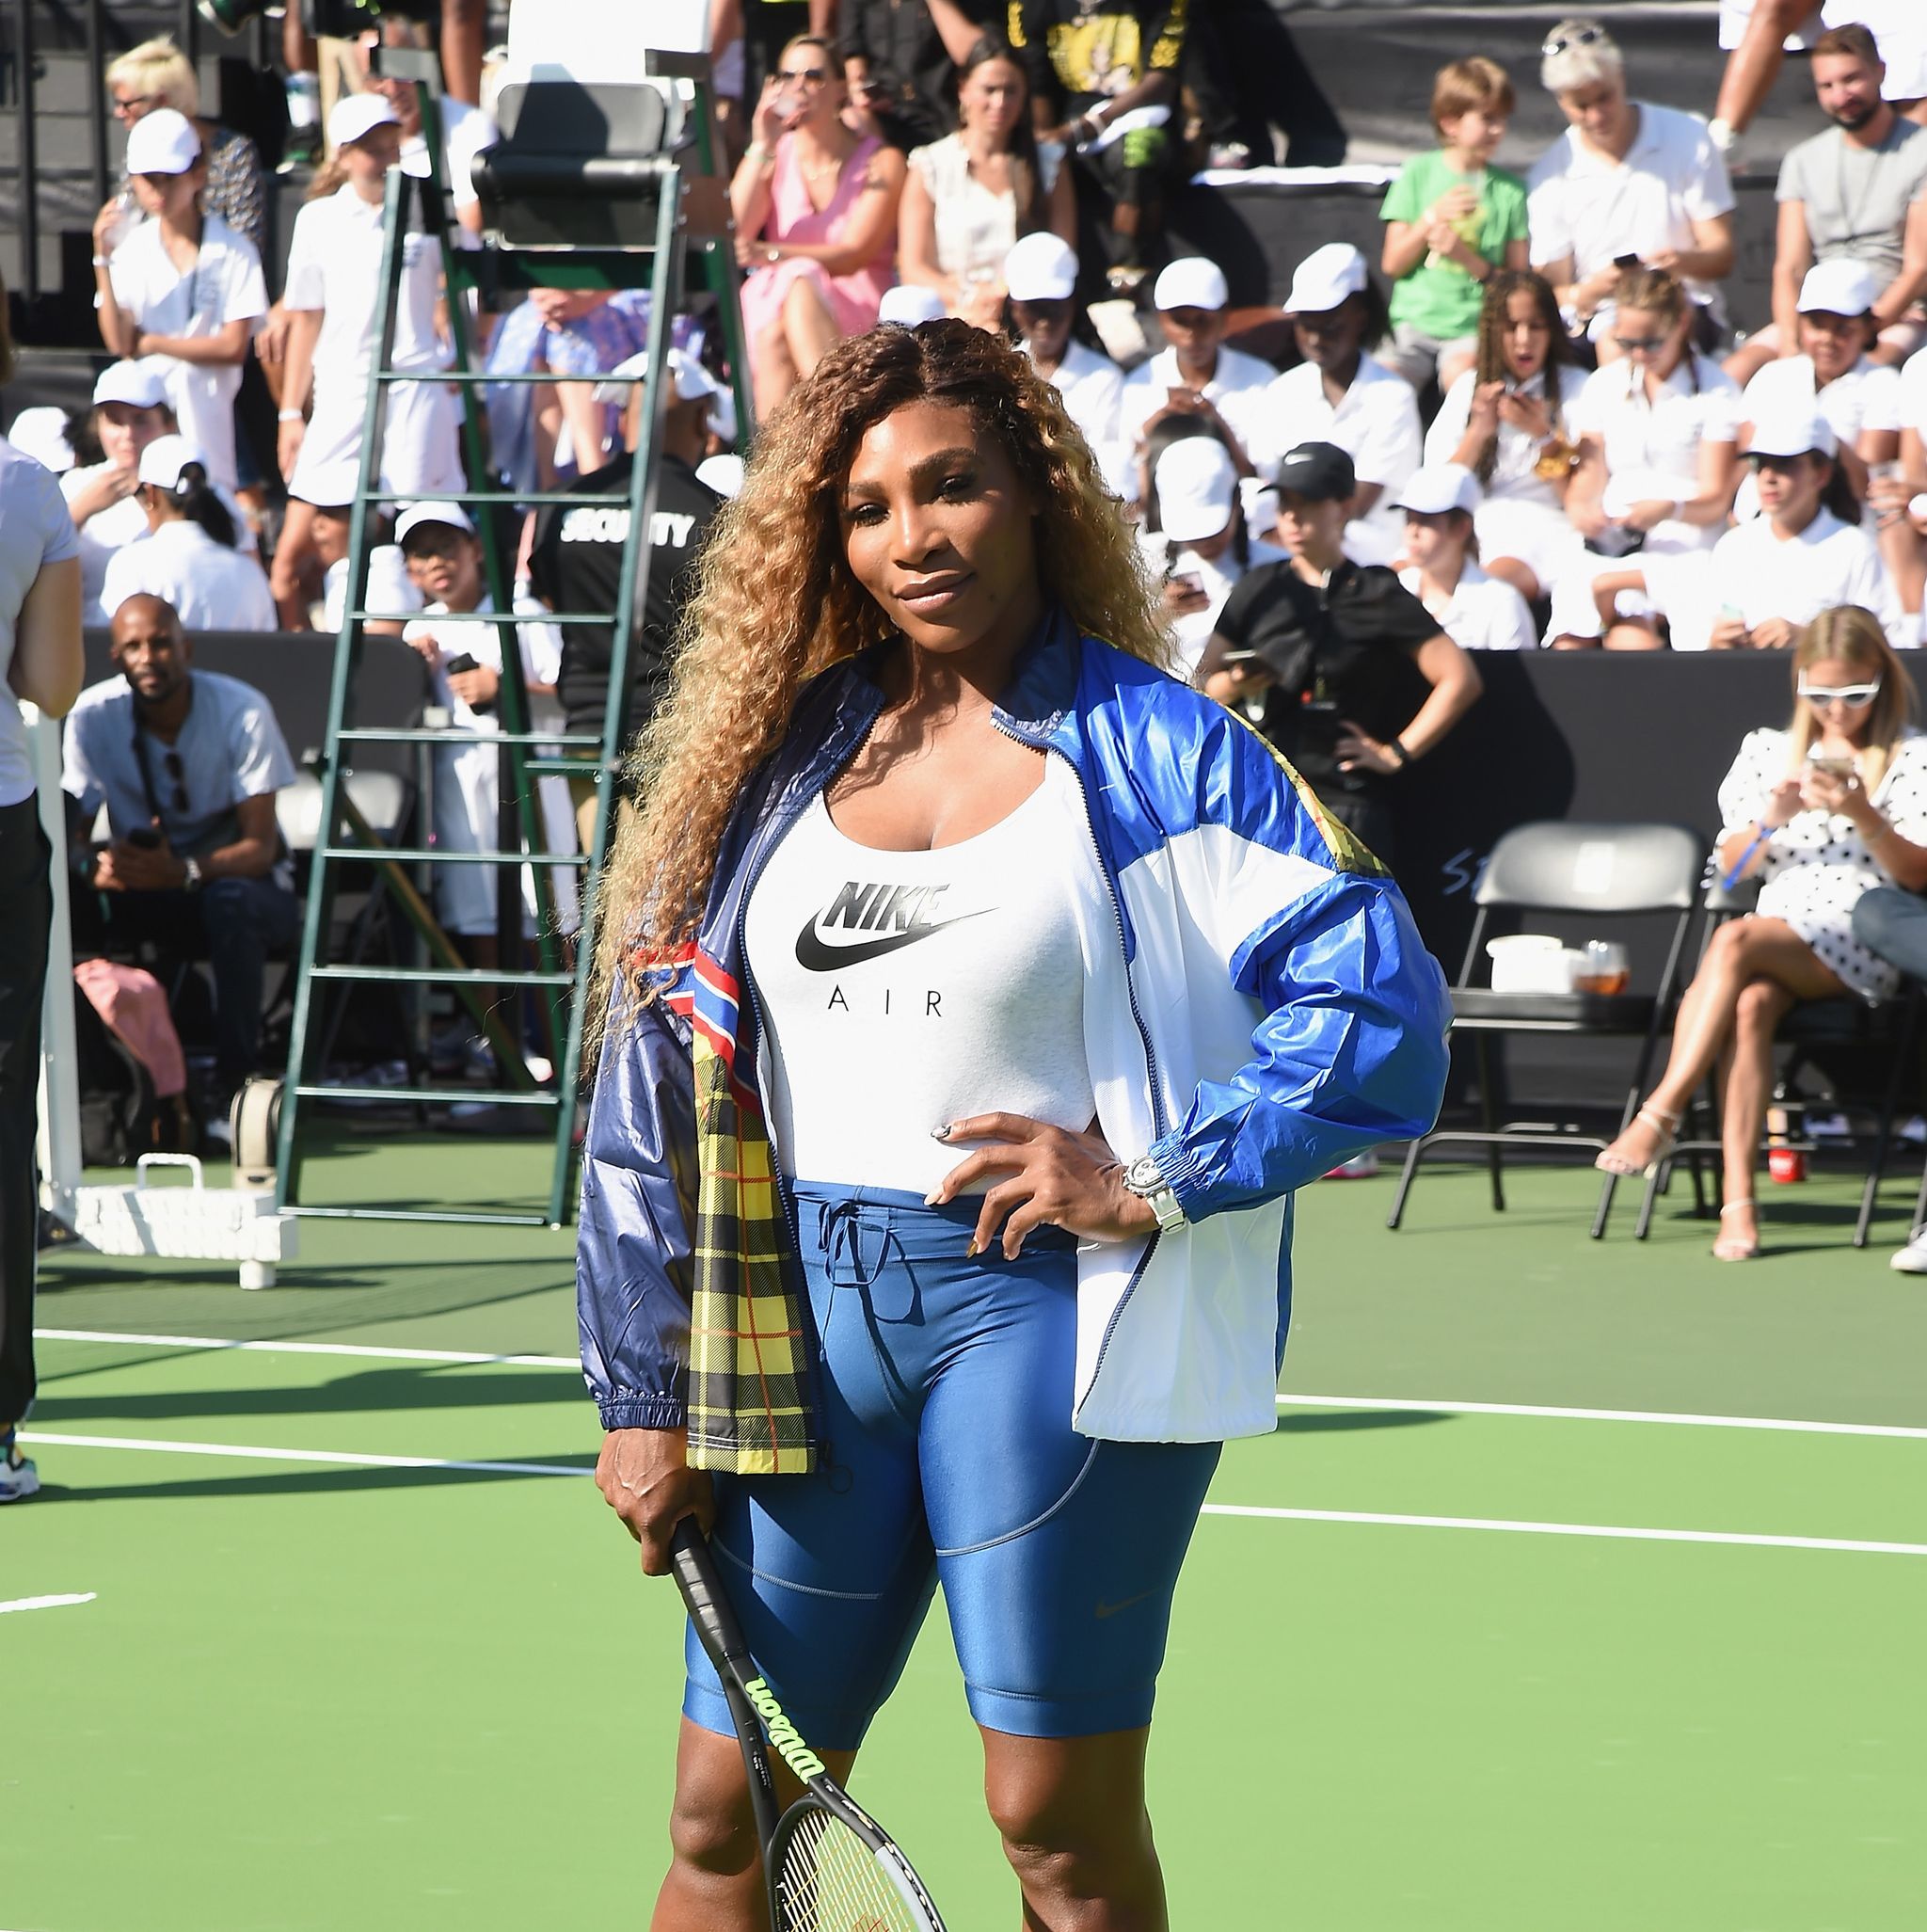 Serena Williams' Best Fashion Moments on the Tennis Court